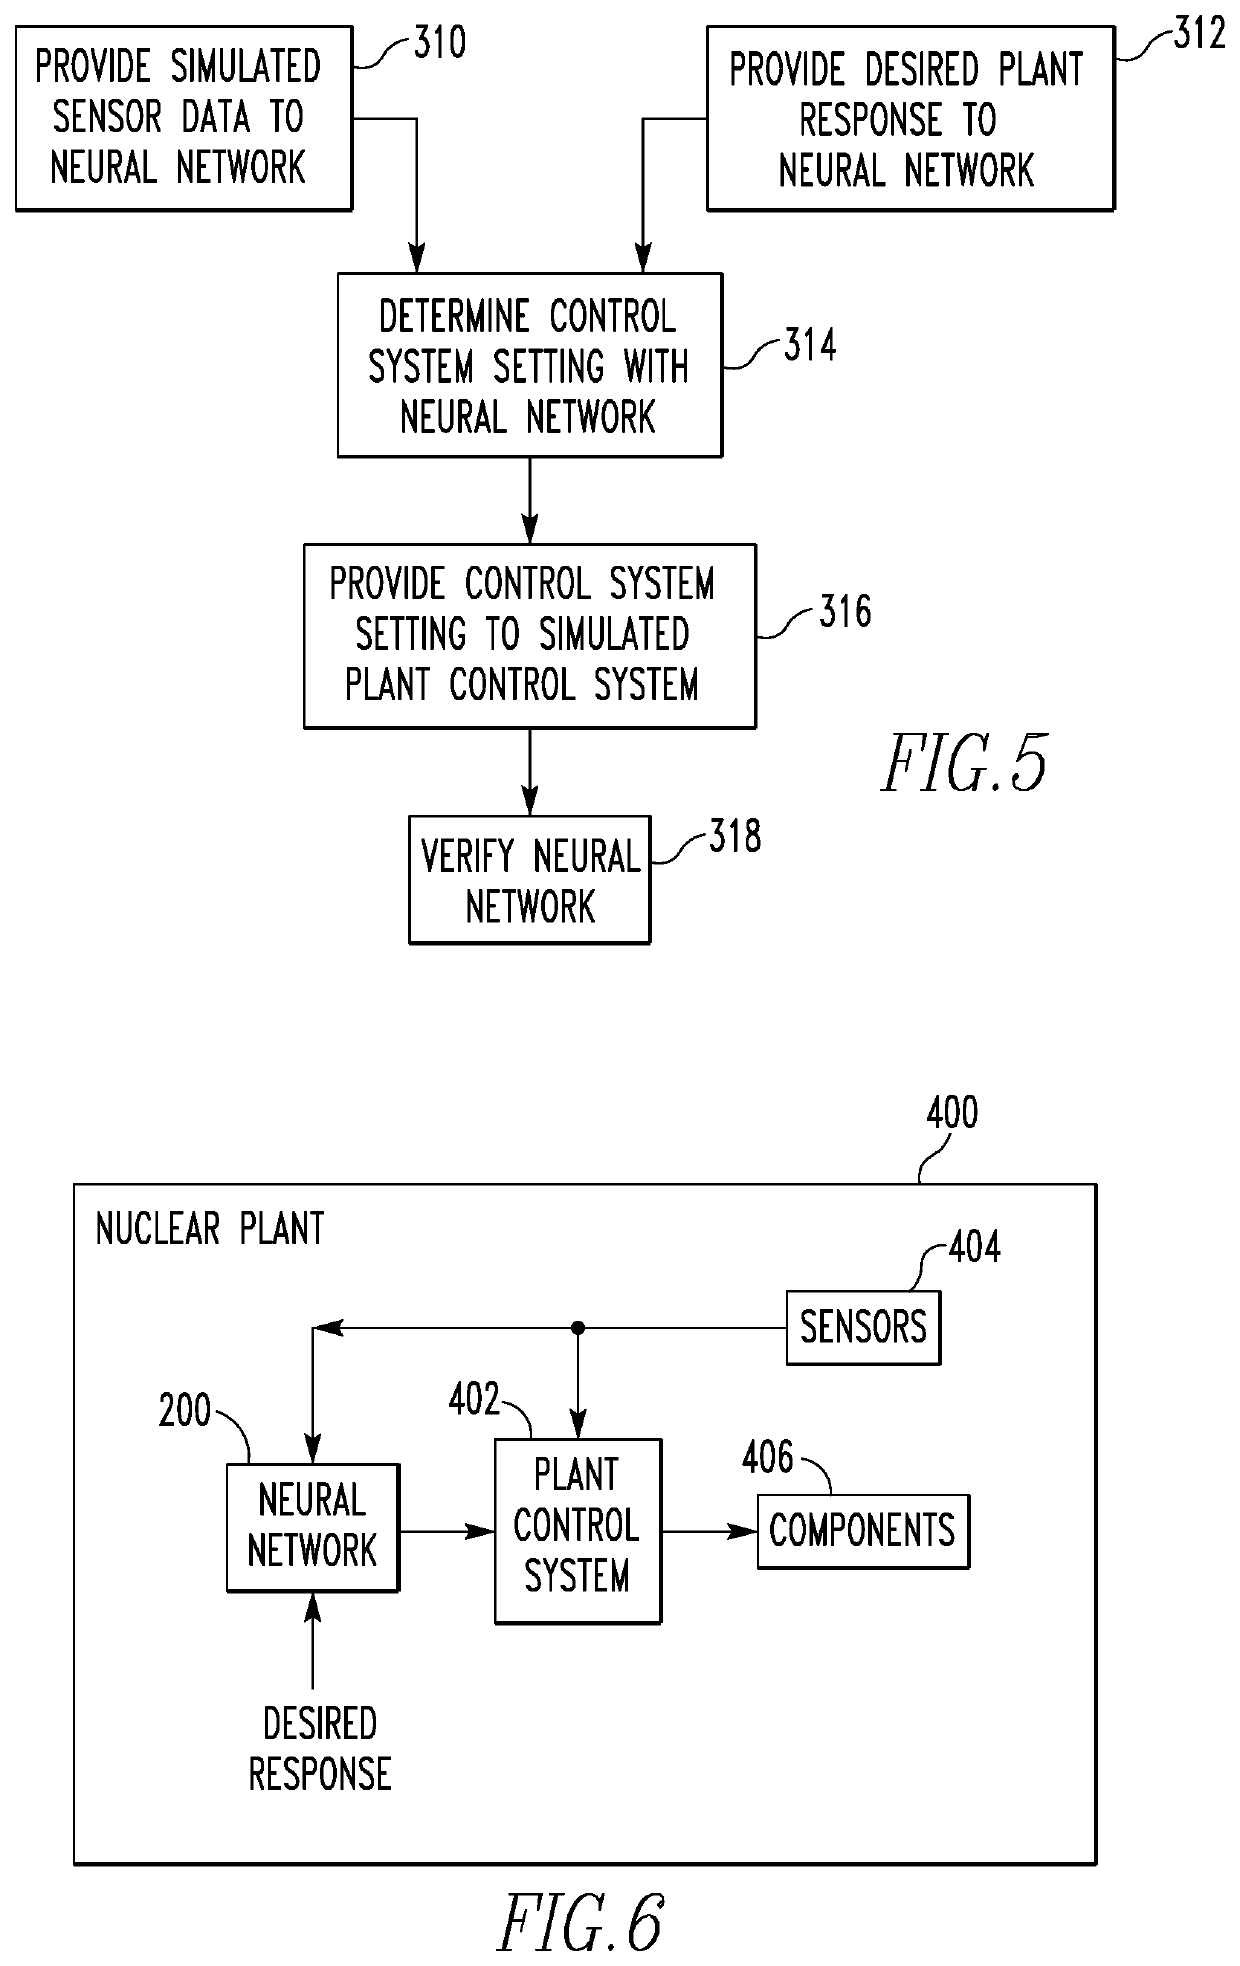 Nuclear control system with neural network